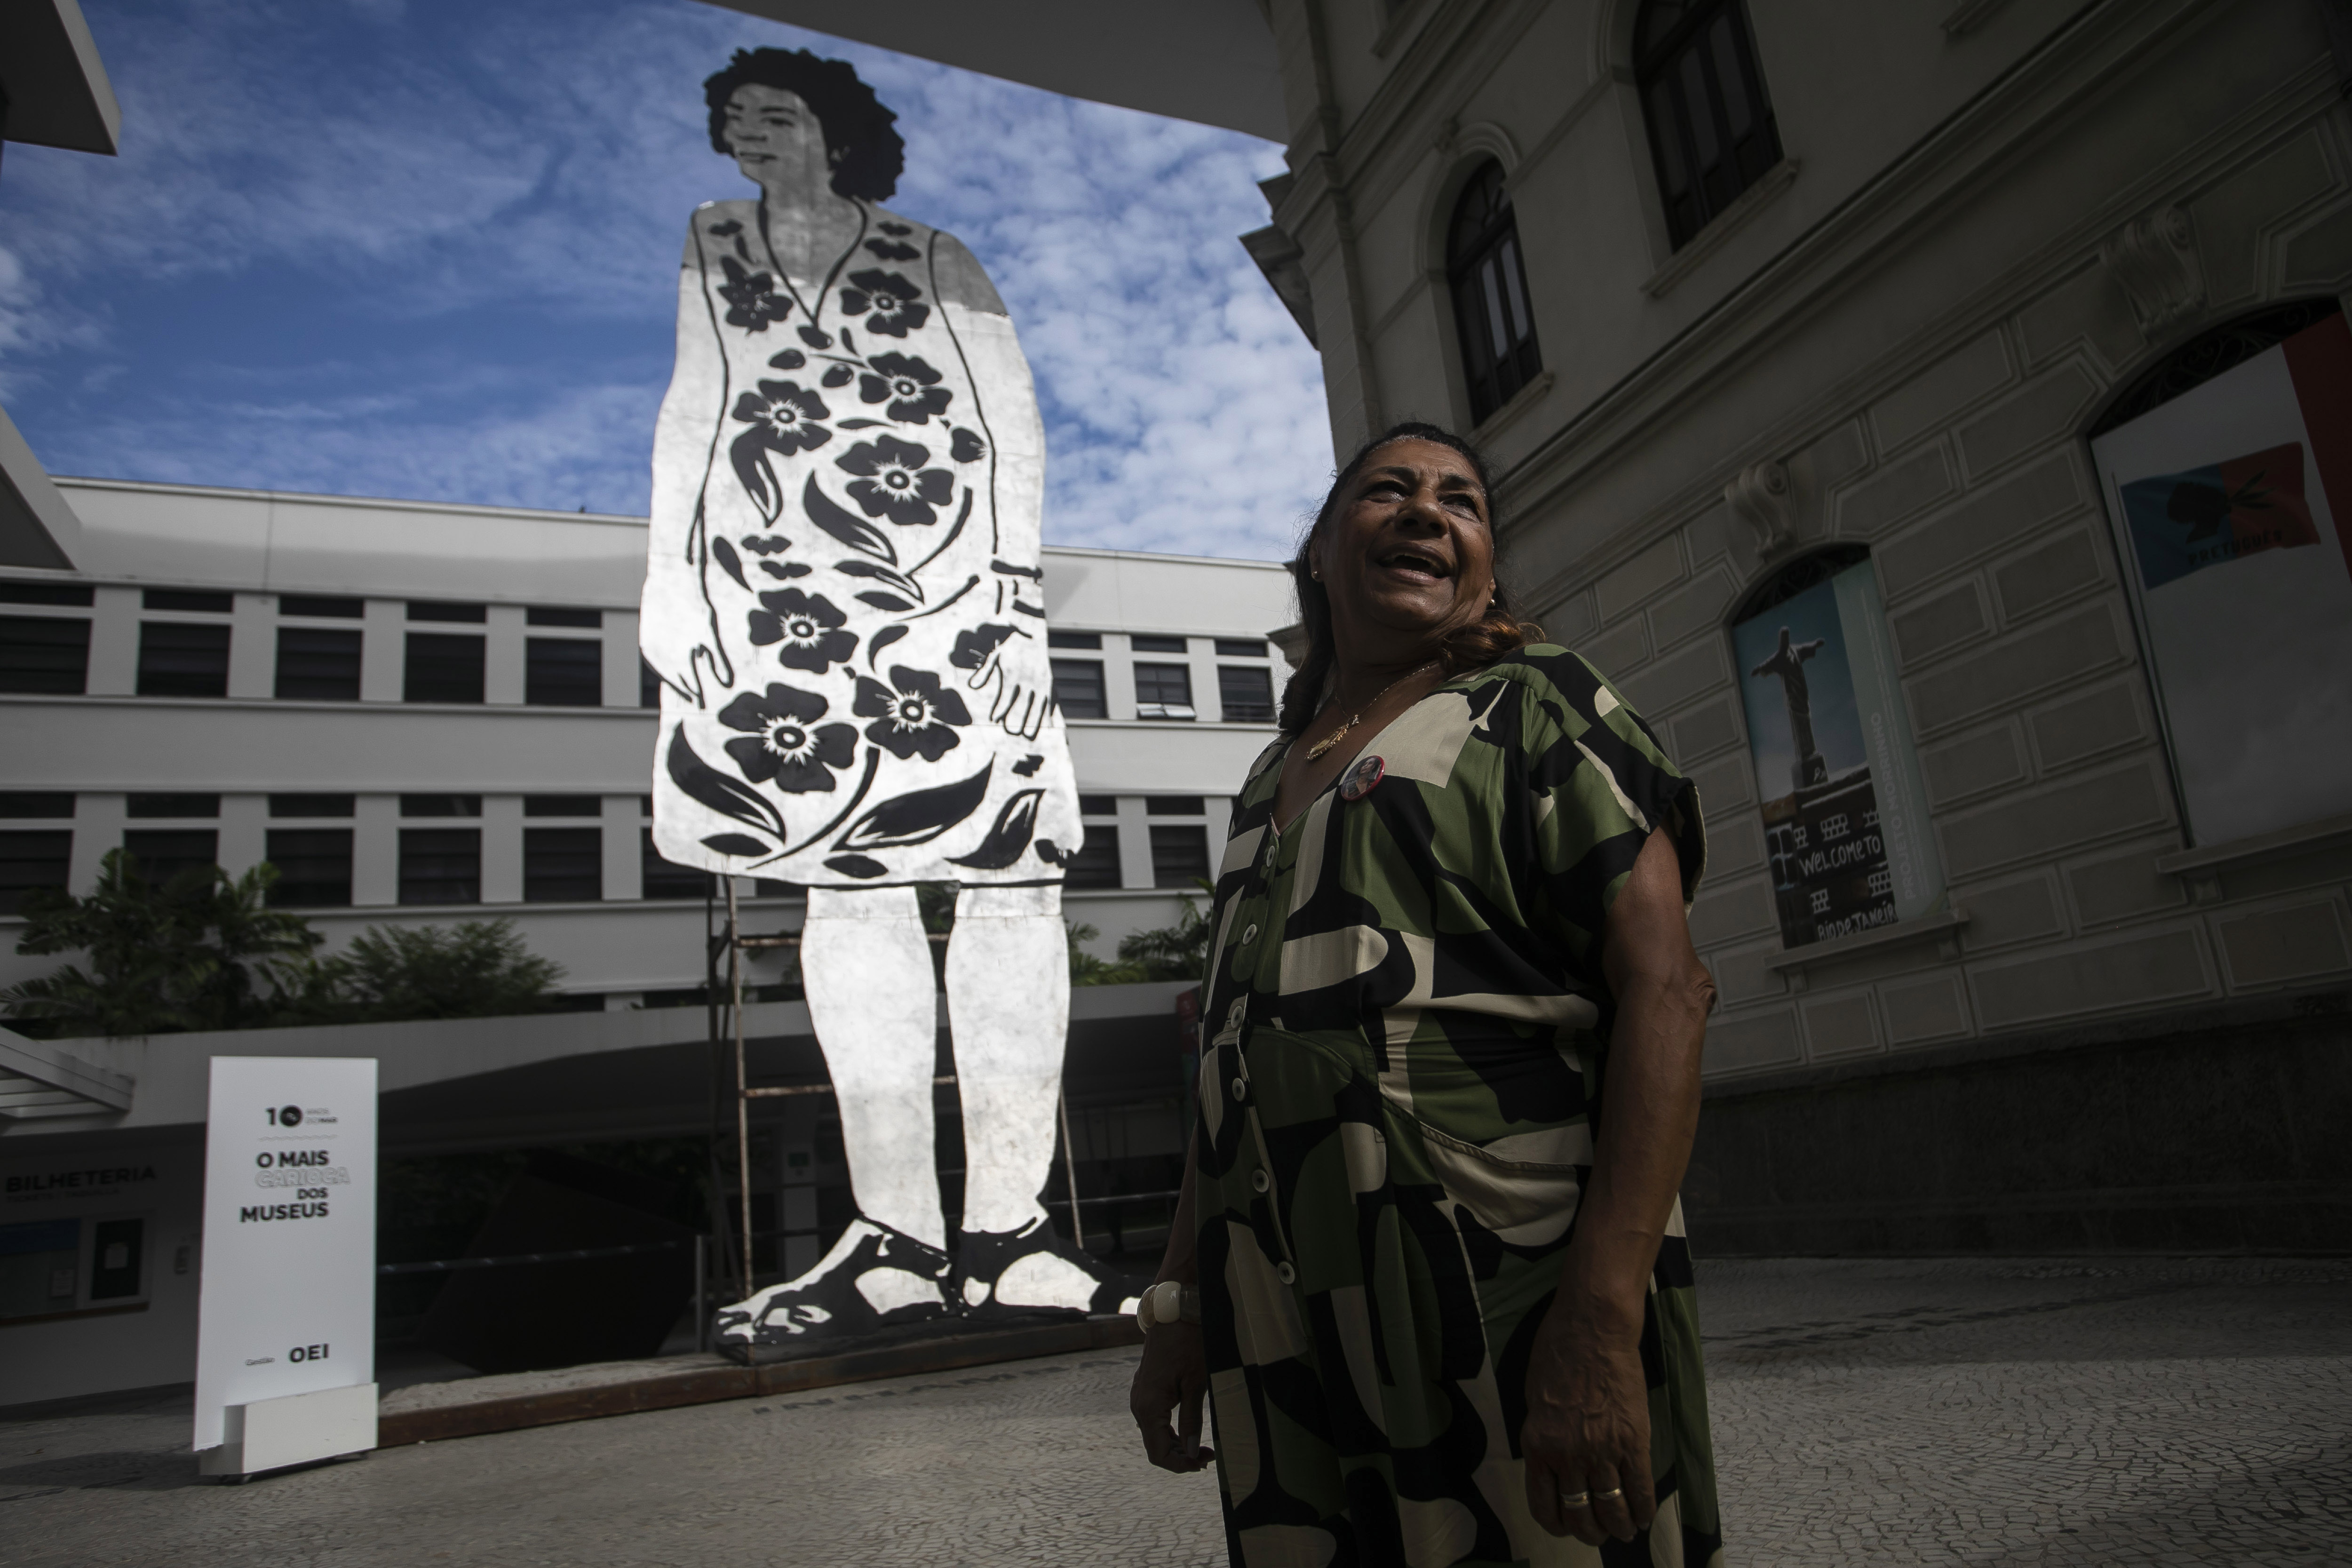 Marinette da Silva, mother of slain councilwoman Marielle Franco, stands next to a huge cardboard depicting Franco, during a tribute to commemorate the 5th anniversary of his assassination, at the Rio de Janeiro Museum of Art, Tuesday, December 14. March 2023. (AP Photo/Bruna Prado)